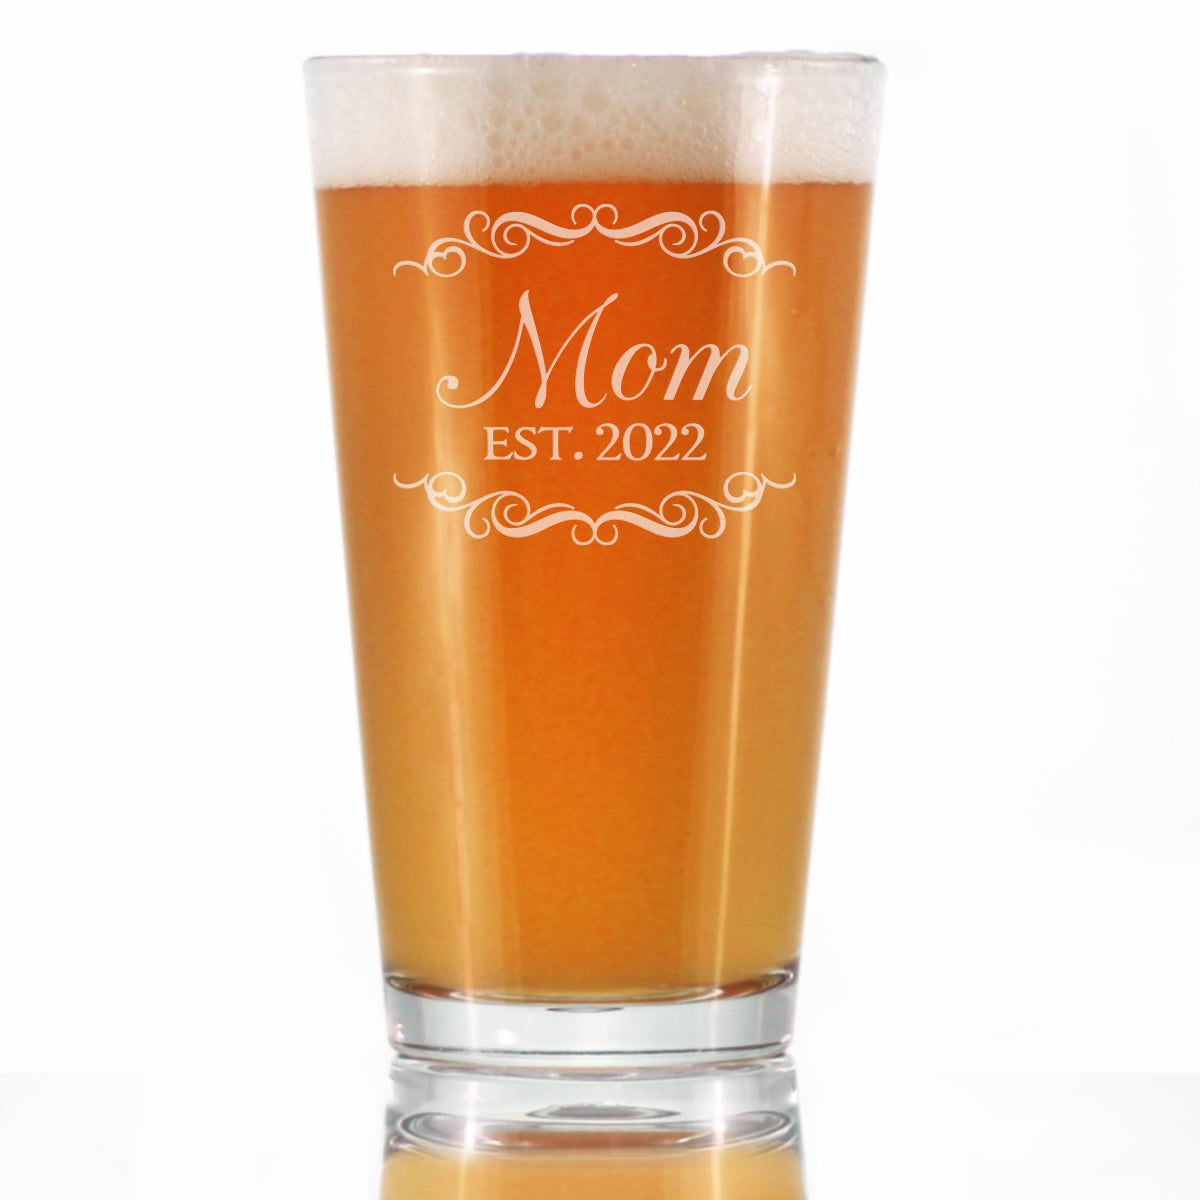 Mom Est 2022 - New Mother Pint Glass Gift for First Time Parents - Decorative 16 Oz Glasses